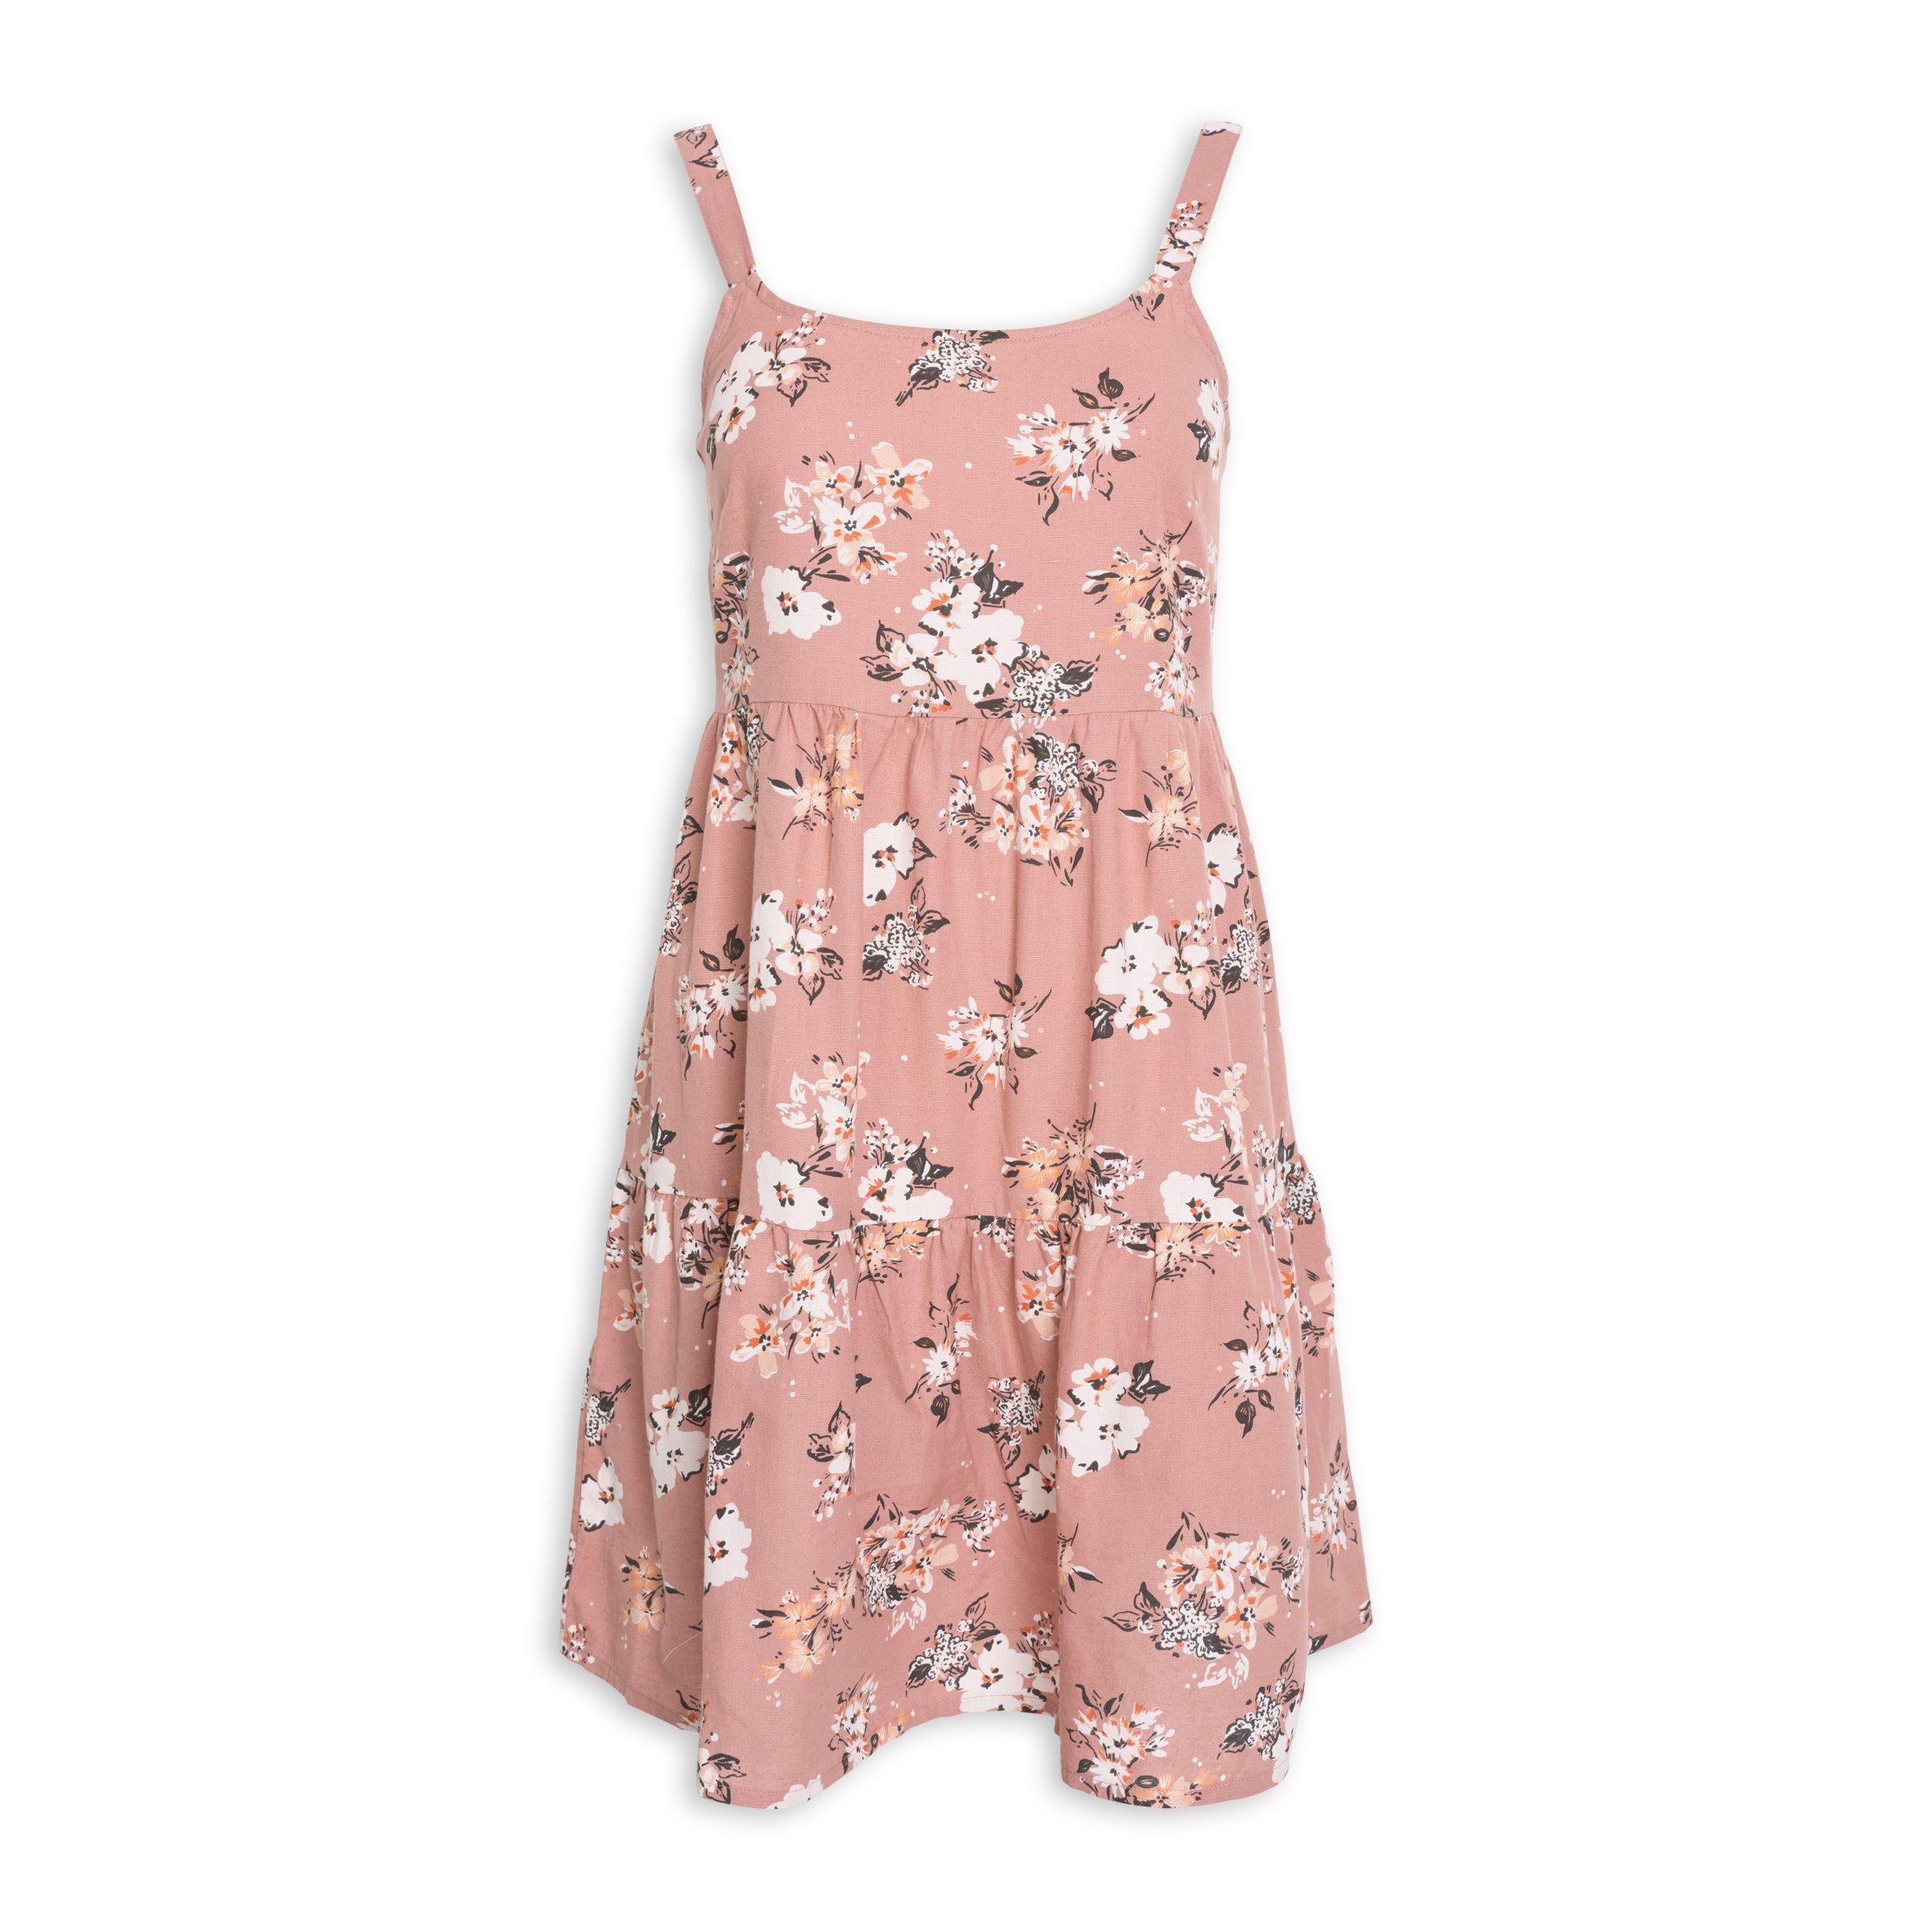 Buy Hey Betty Floral Tiered Dress Online | Truworths